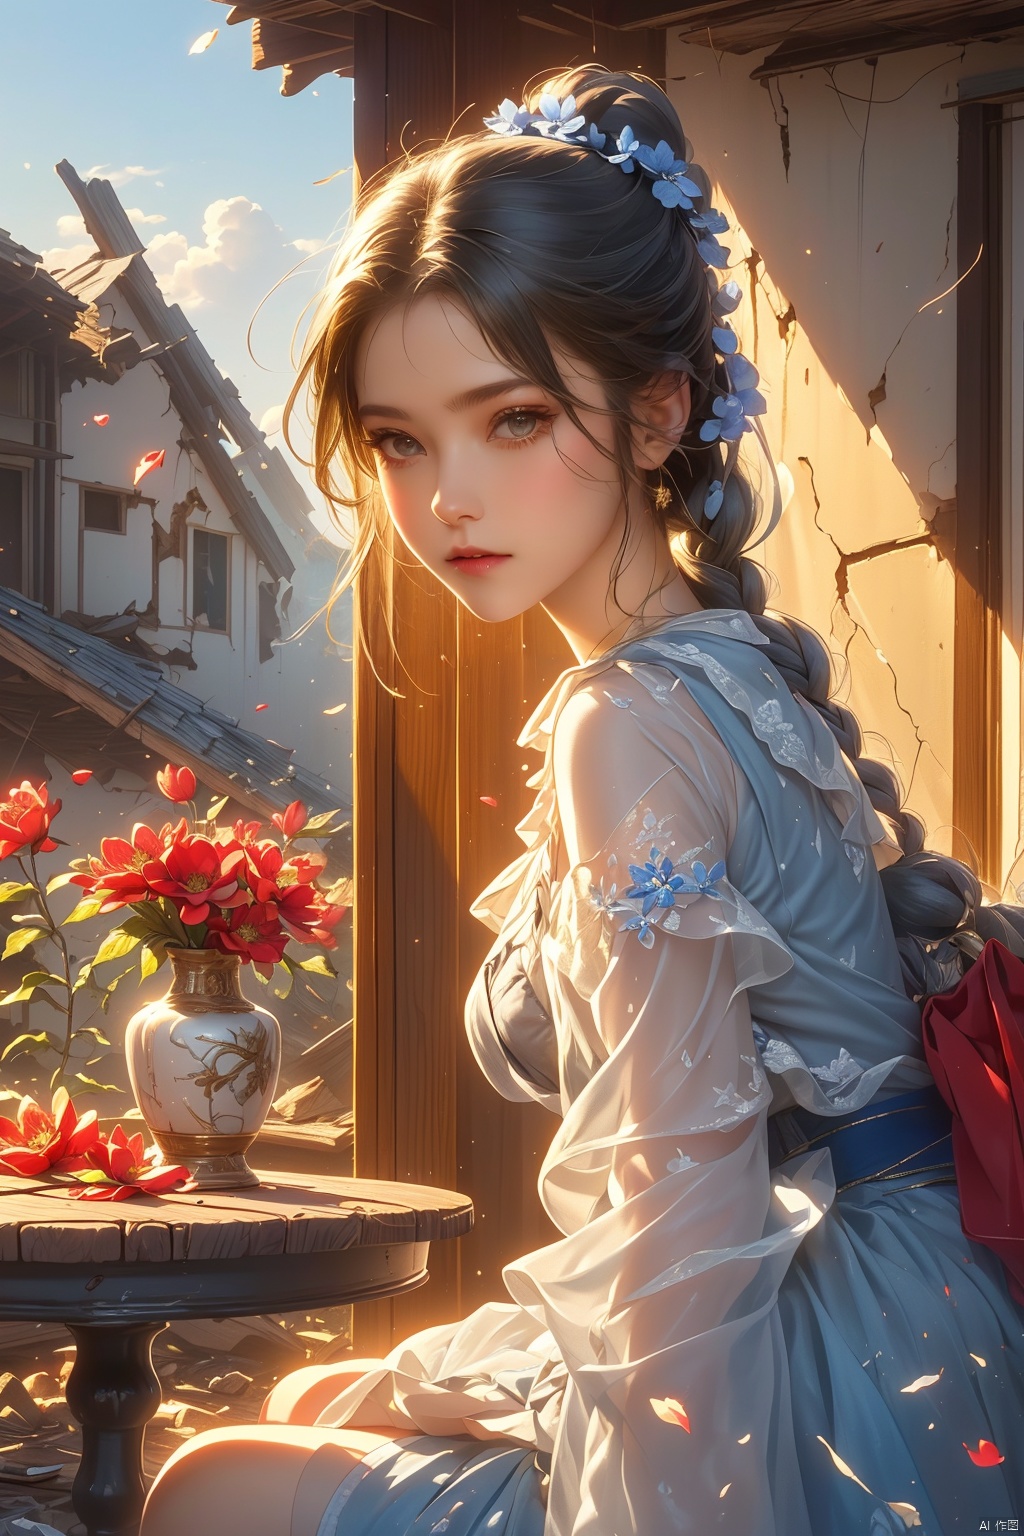  (detailed light), (an extremely delicate and beautiful), (1 girl holdding vase and flower)
(cowboy shot:1.3)
(from side:1.25), (1 loli:1.2), grey hair, (messy braid ponytail), (wearing old ripped dress), (long grey dress), frills, (Smile, hope, sunshine:1.2), (solo), (blue eyes:1.2), (Detailed beautiful eyes, lively eyes), (sitting), table
volume light, best shadow, flash, Depth of field, dynamic angle, Oily skin
(looking at vase), (1 Detailed vase), (red flower inside of vase), (Detailed and beautiful), (Holdding vase)
(outdoors, Earthquake debris, cracked ground, collapsed houses in the distance, grey sky, smoky), guzhuang